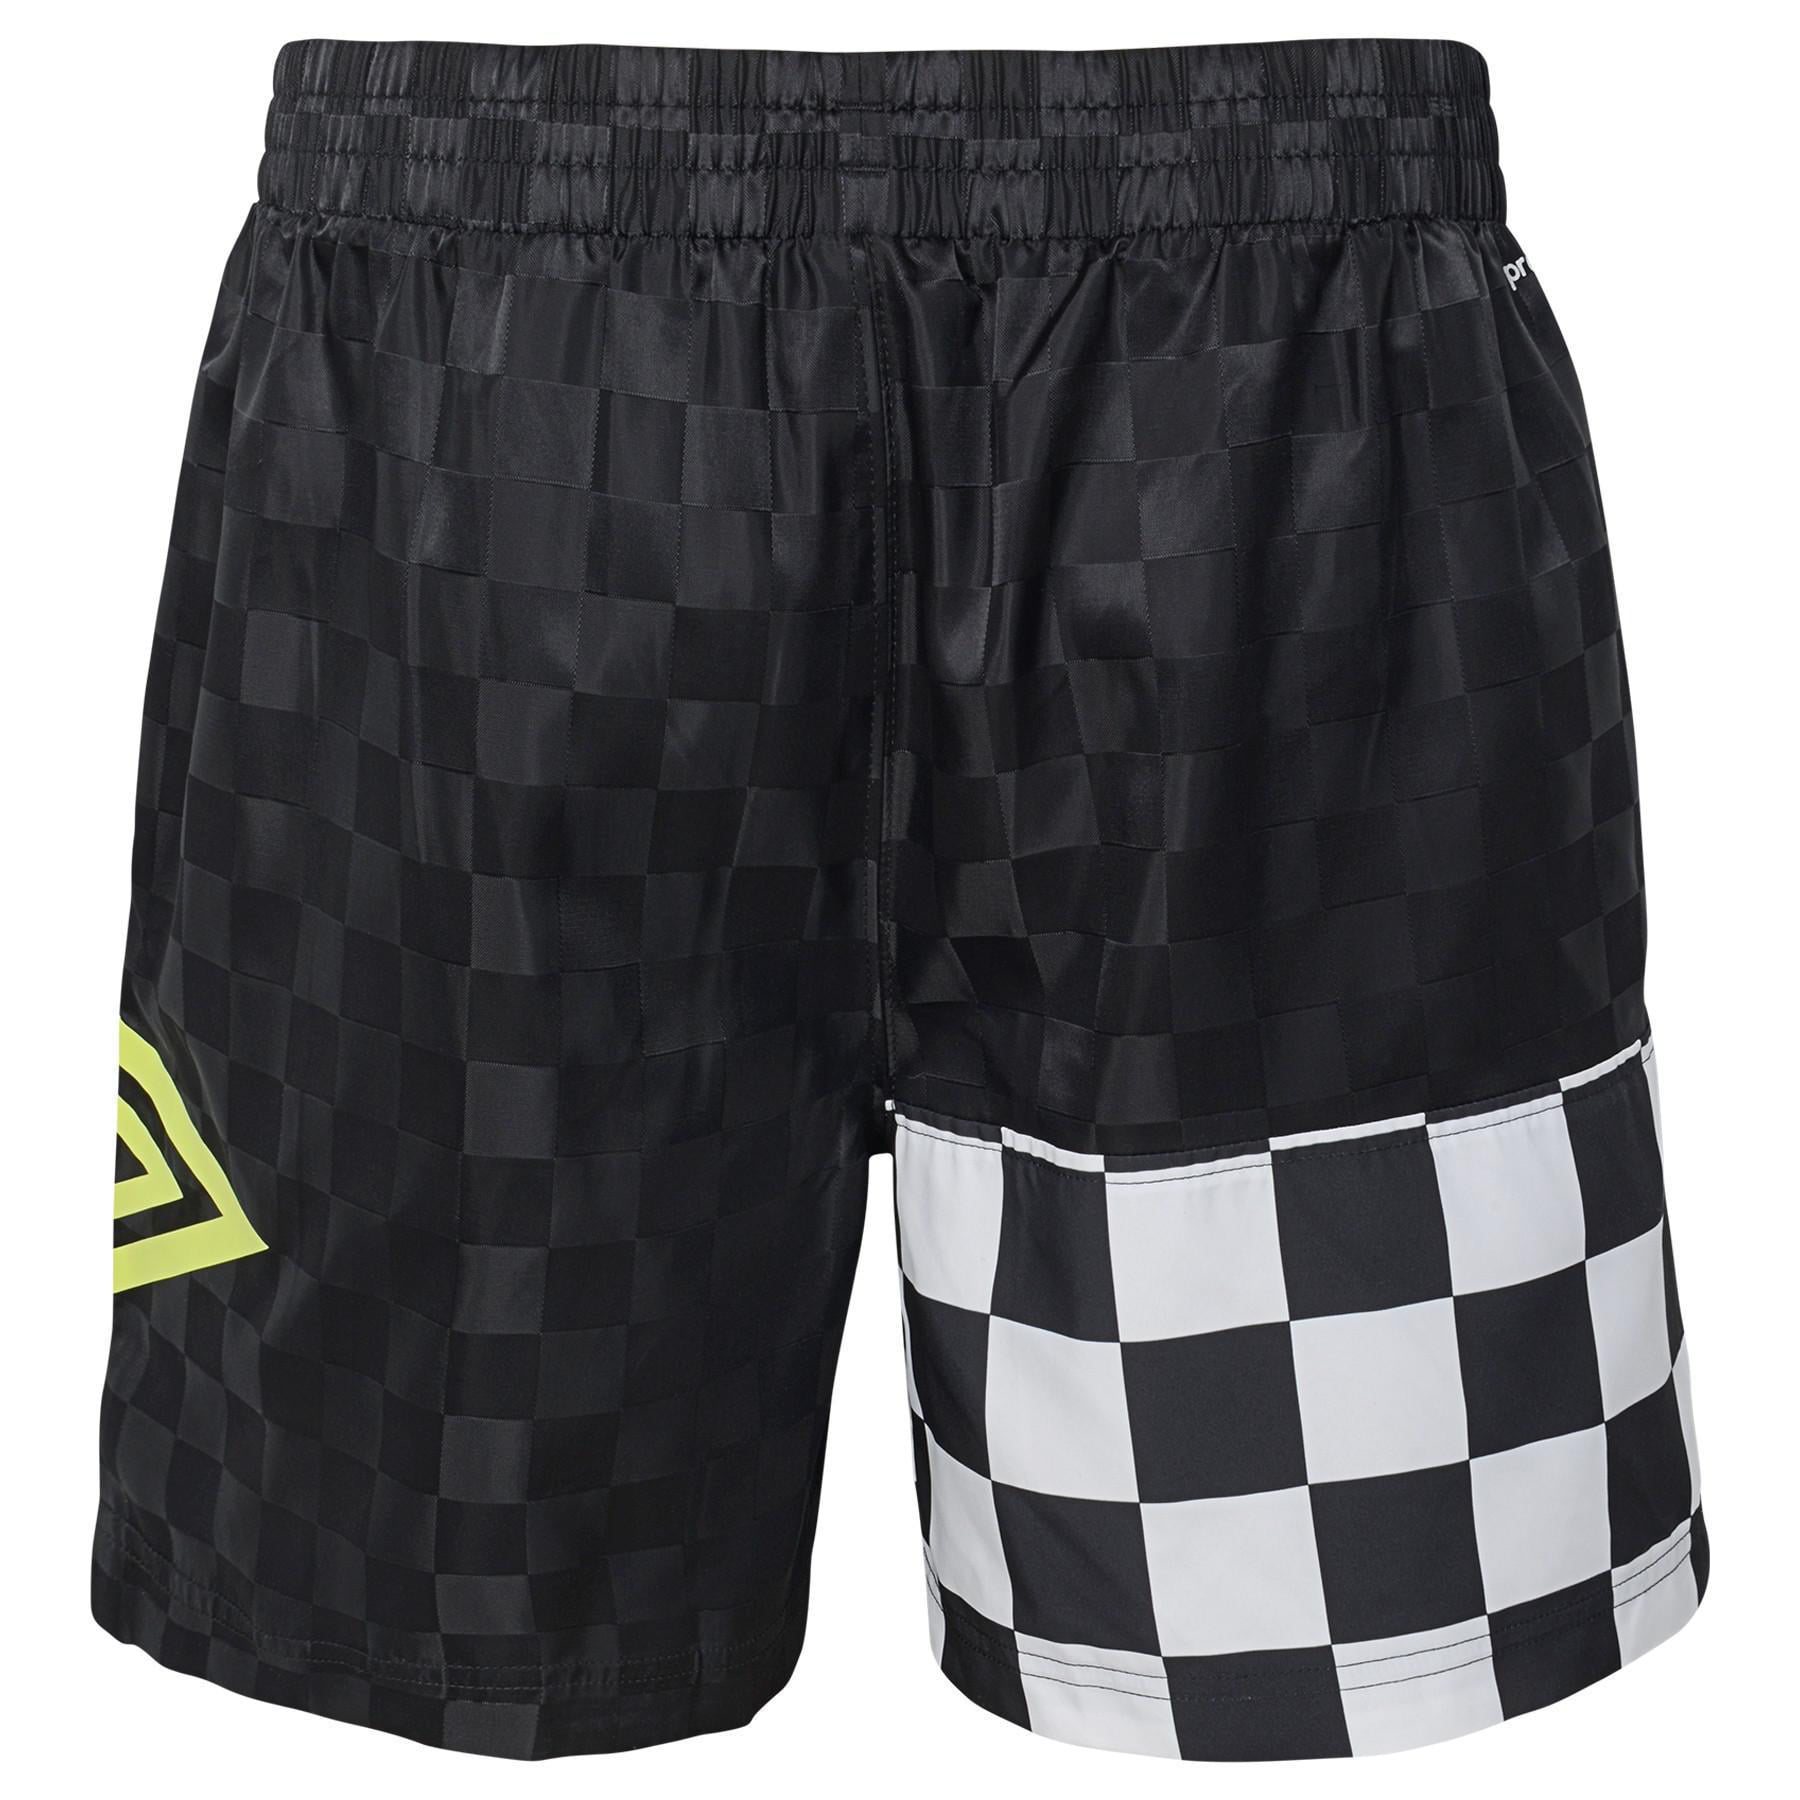 Kendis Soccer Short,Generic Youth Small Checkerboard Short Black 